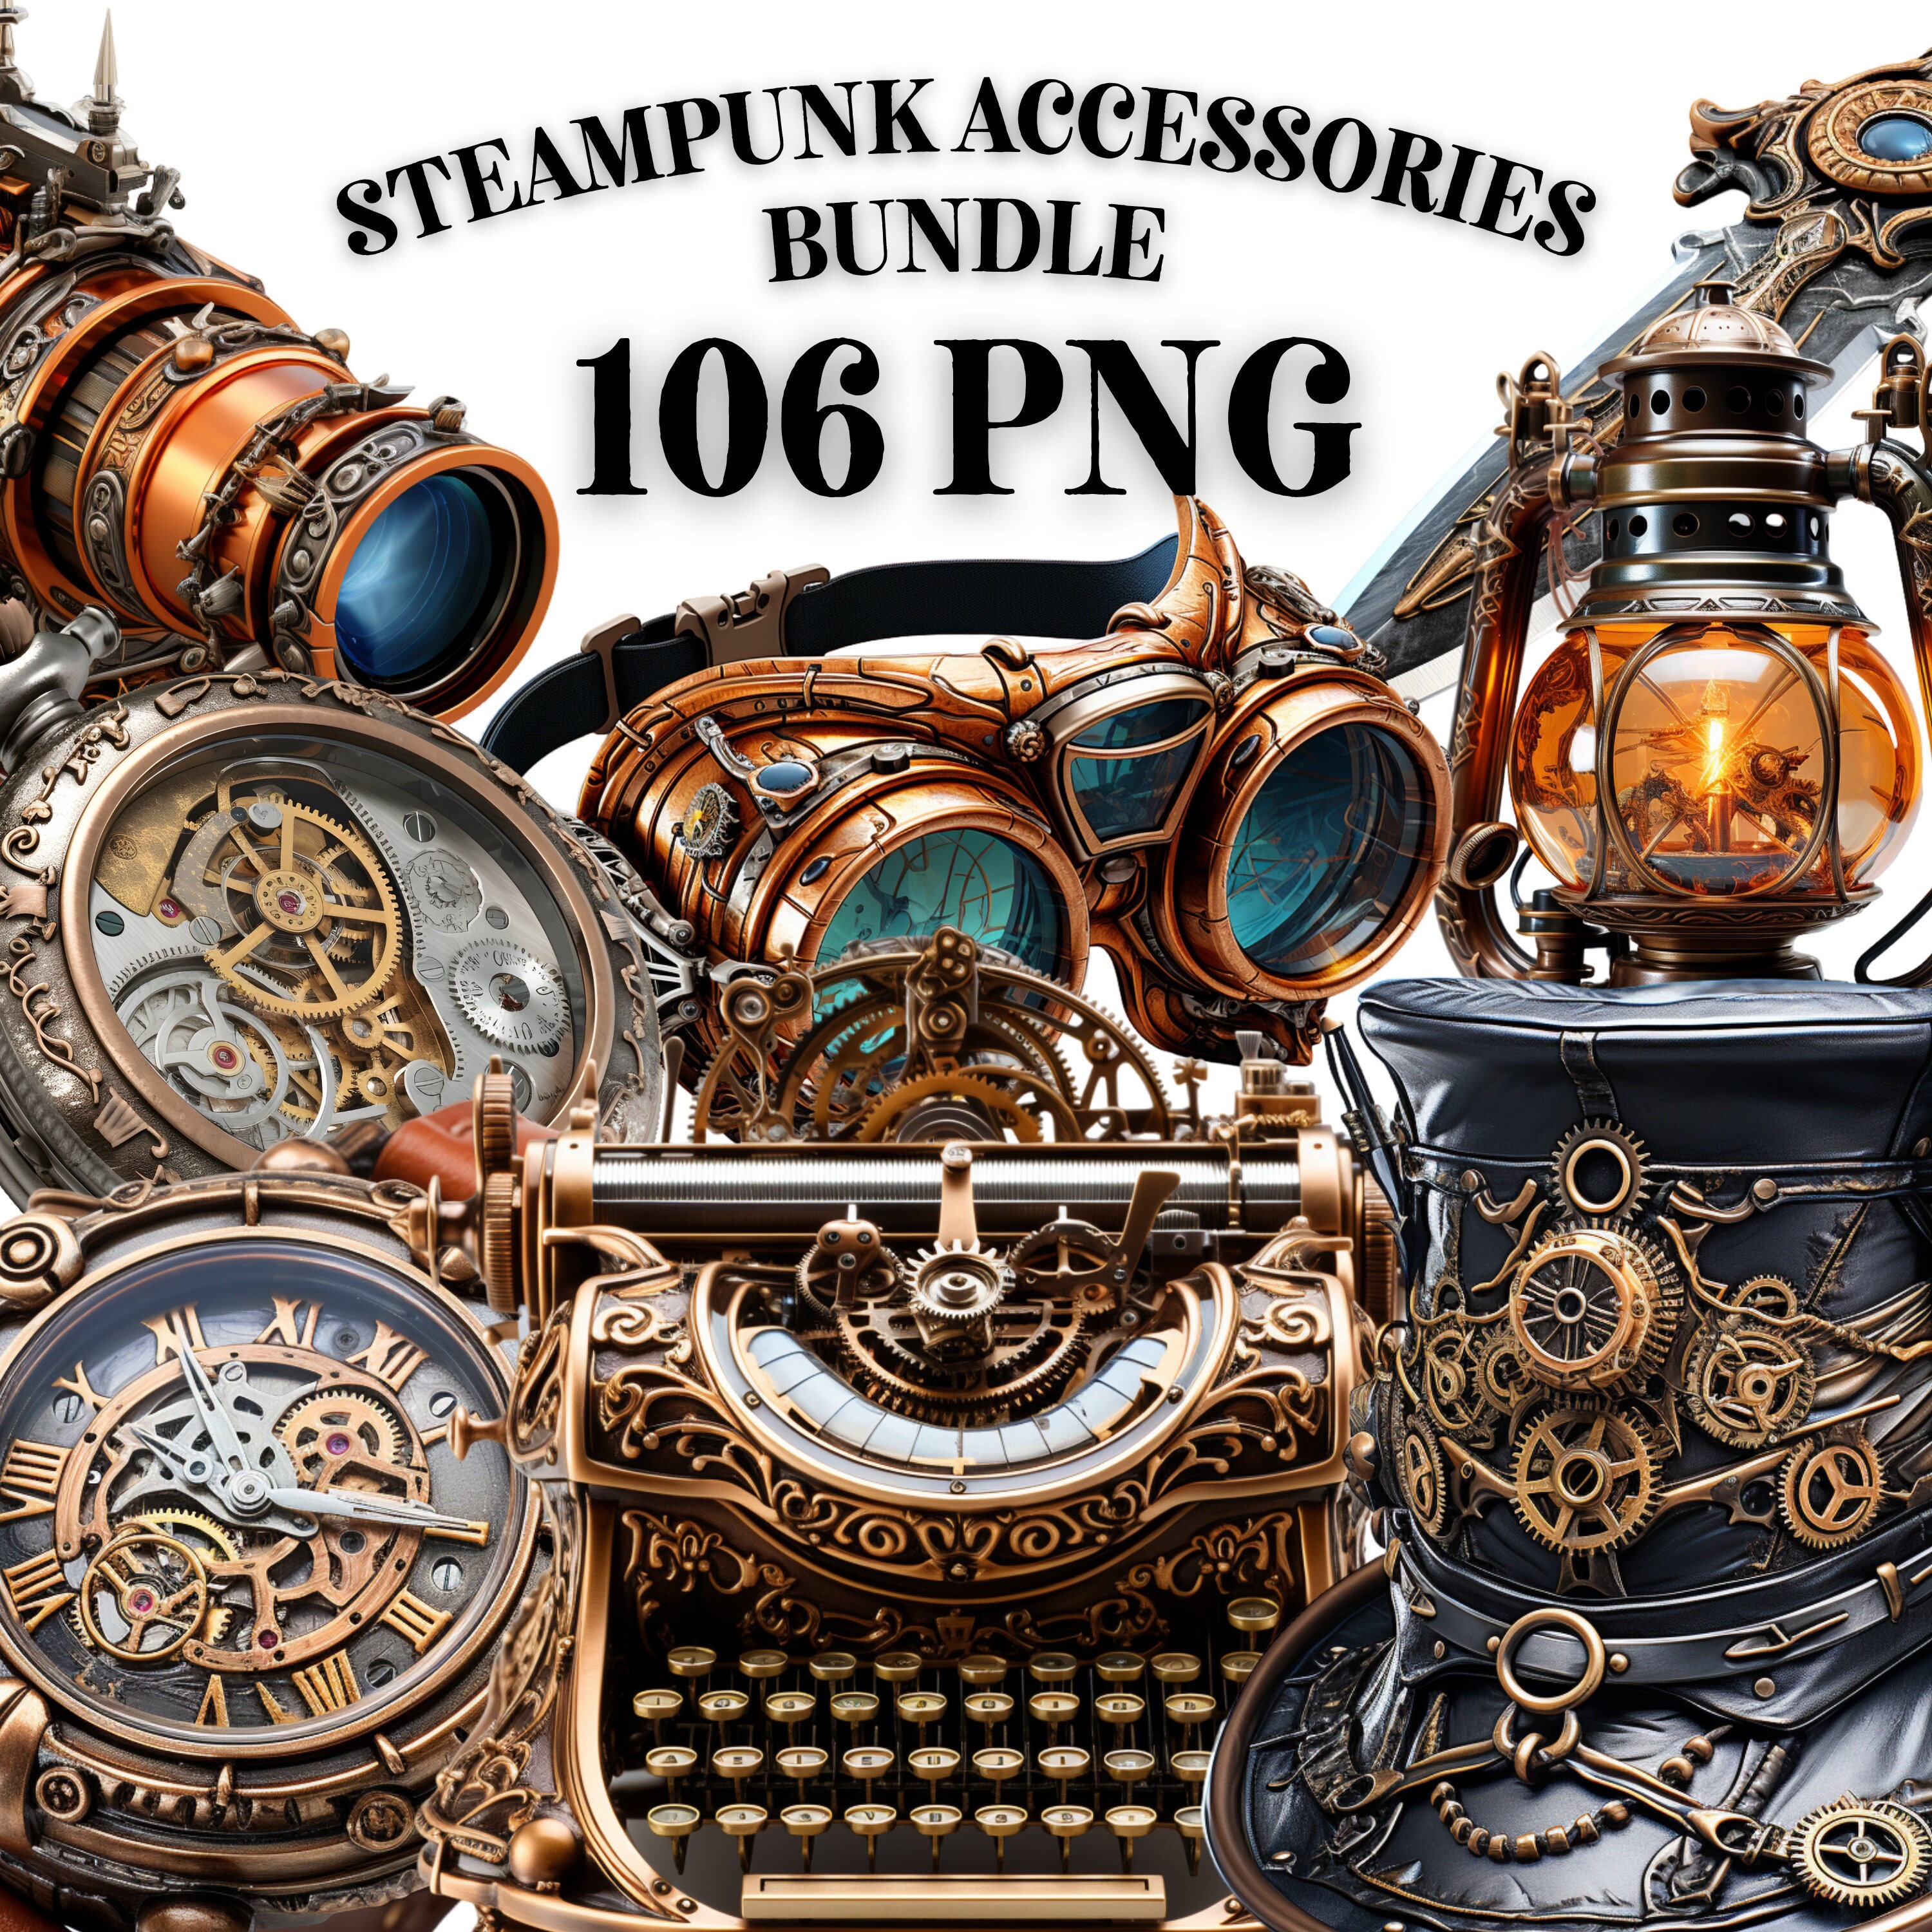 STEAMPUNK ACCESSORIES CLIPART Bundle 106x Png Watercolor Fantasy  Transparent Downloads for Commercial Use, Craft, Decor and More 